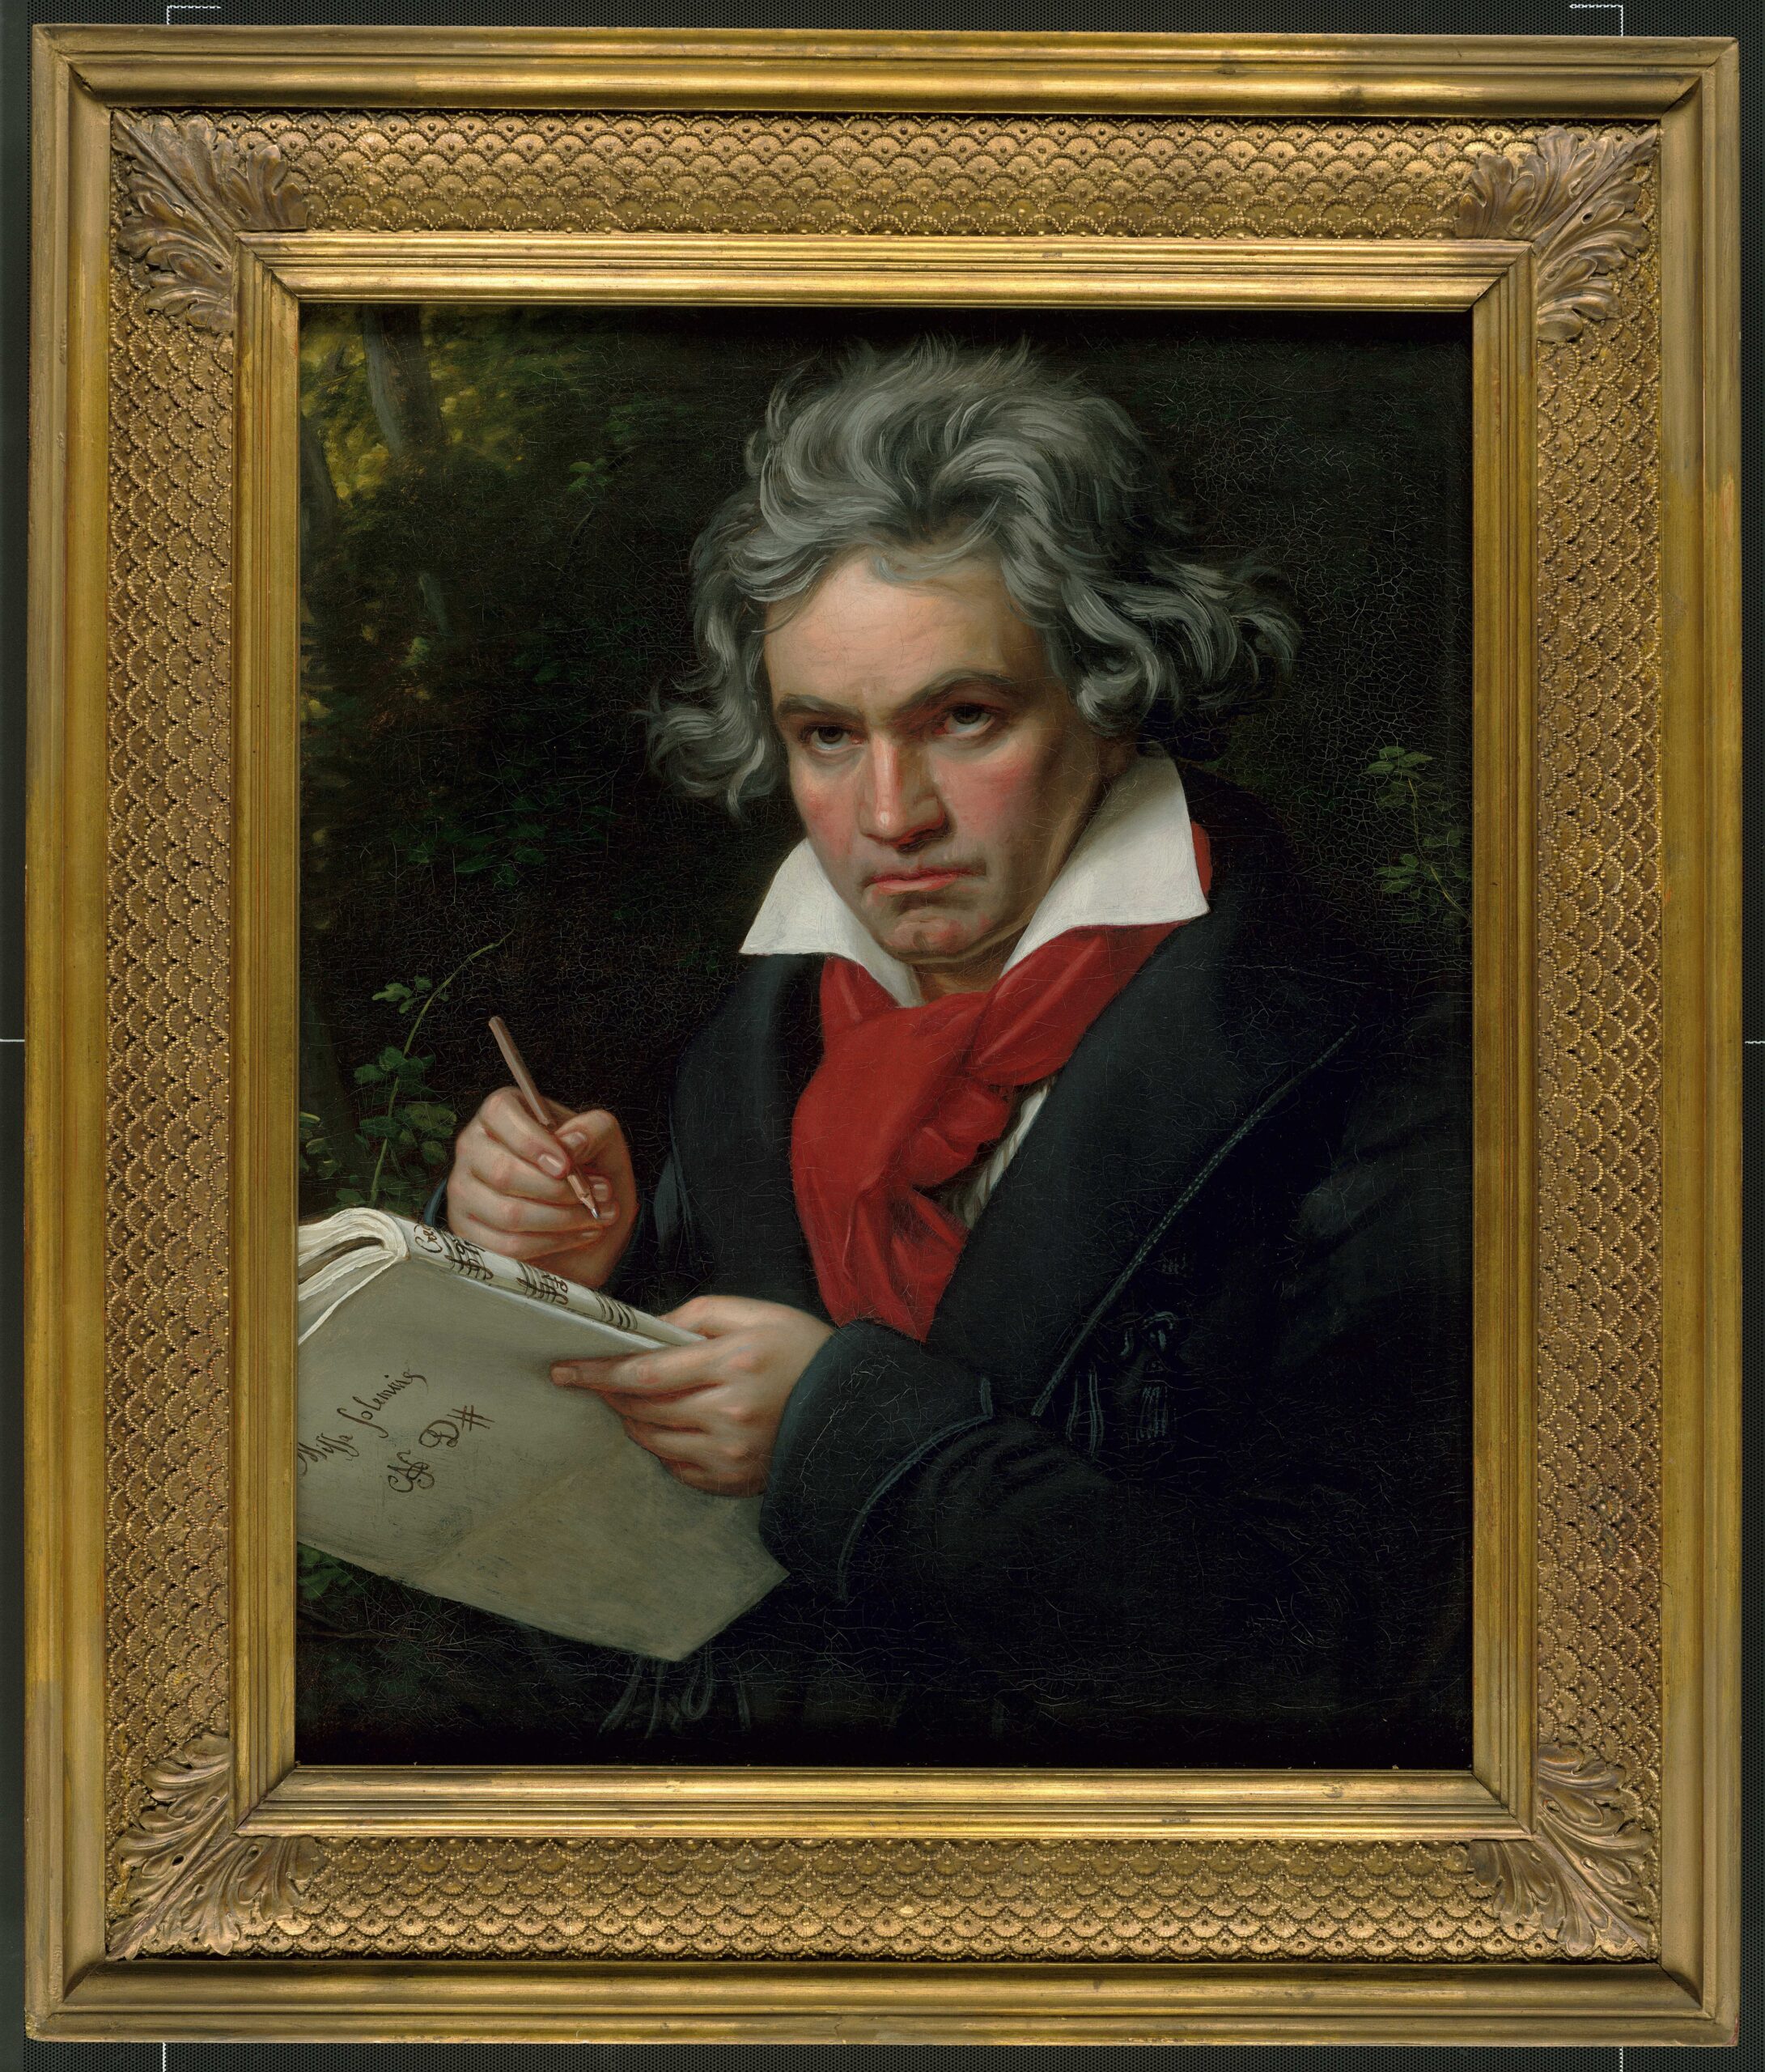 Ludwig von Beethoven’s genome sheds light on chronic health problems and cause of death